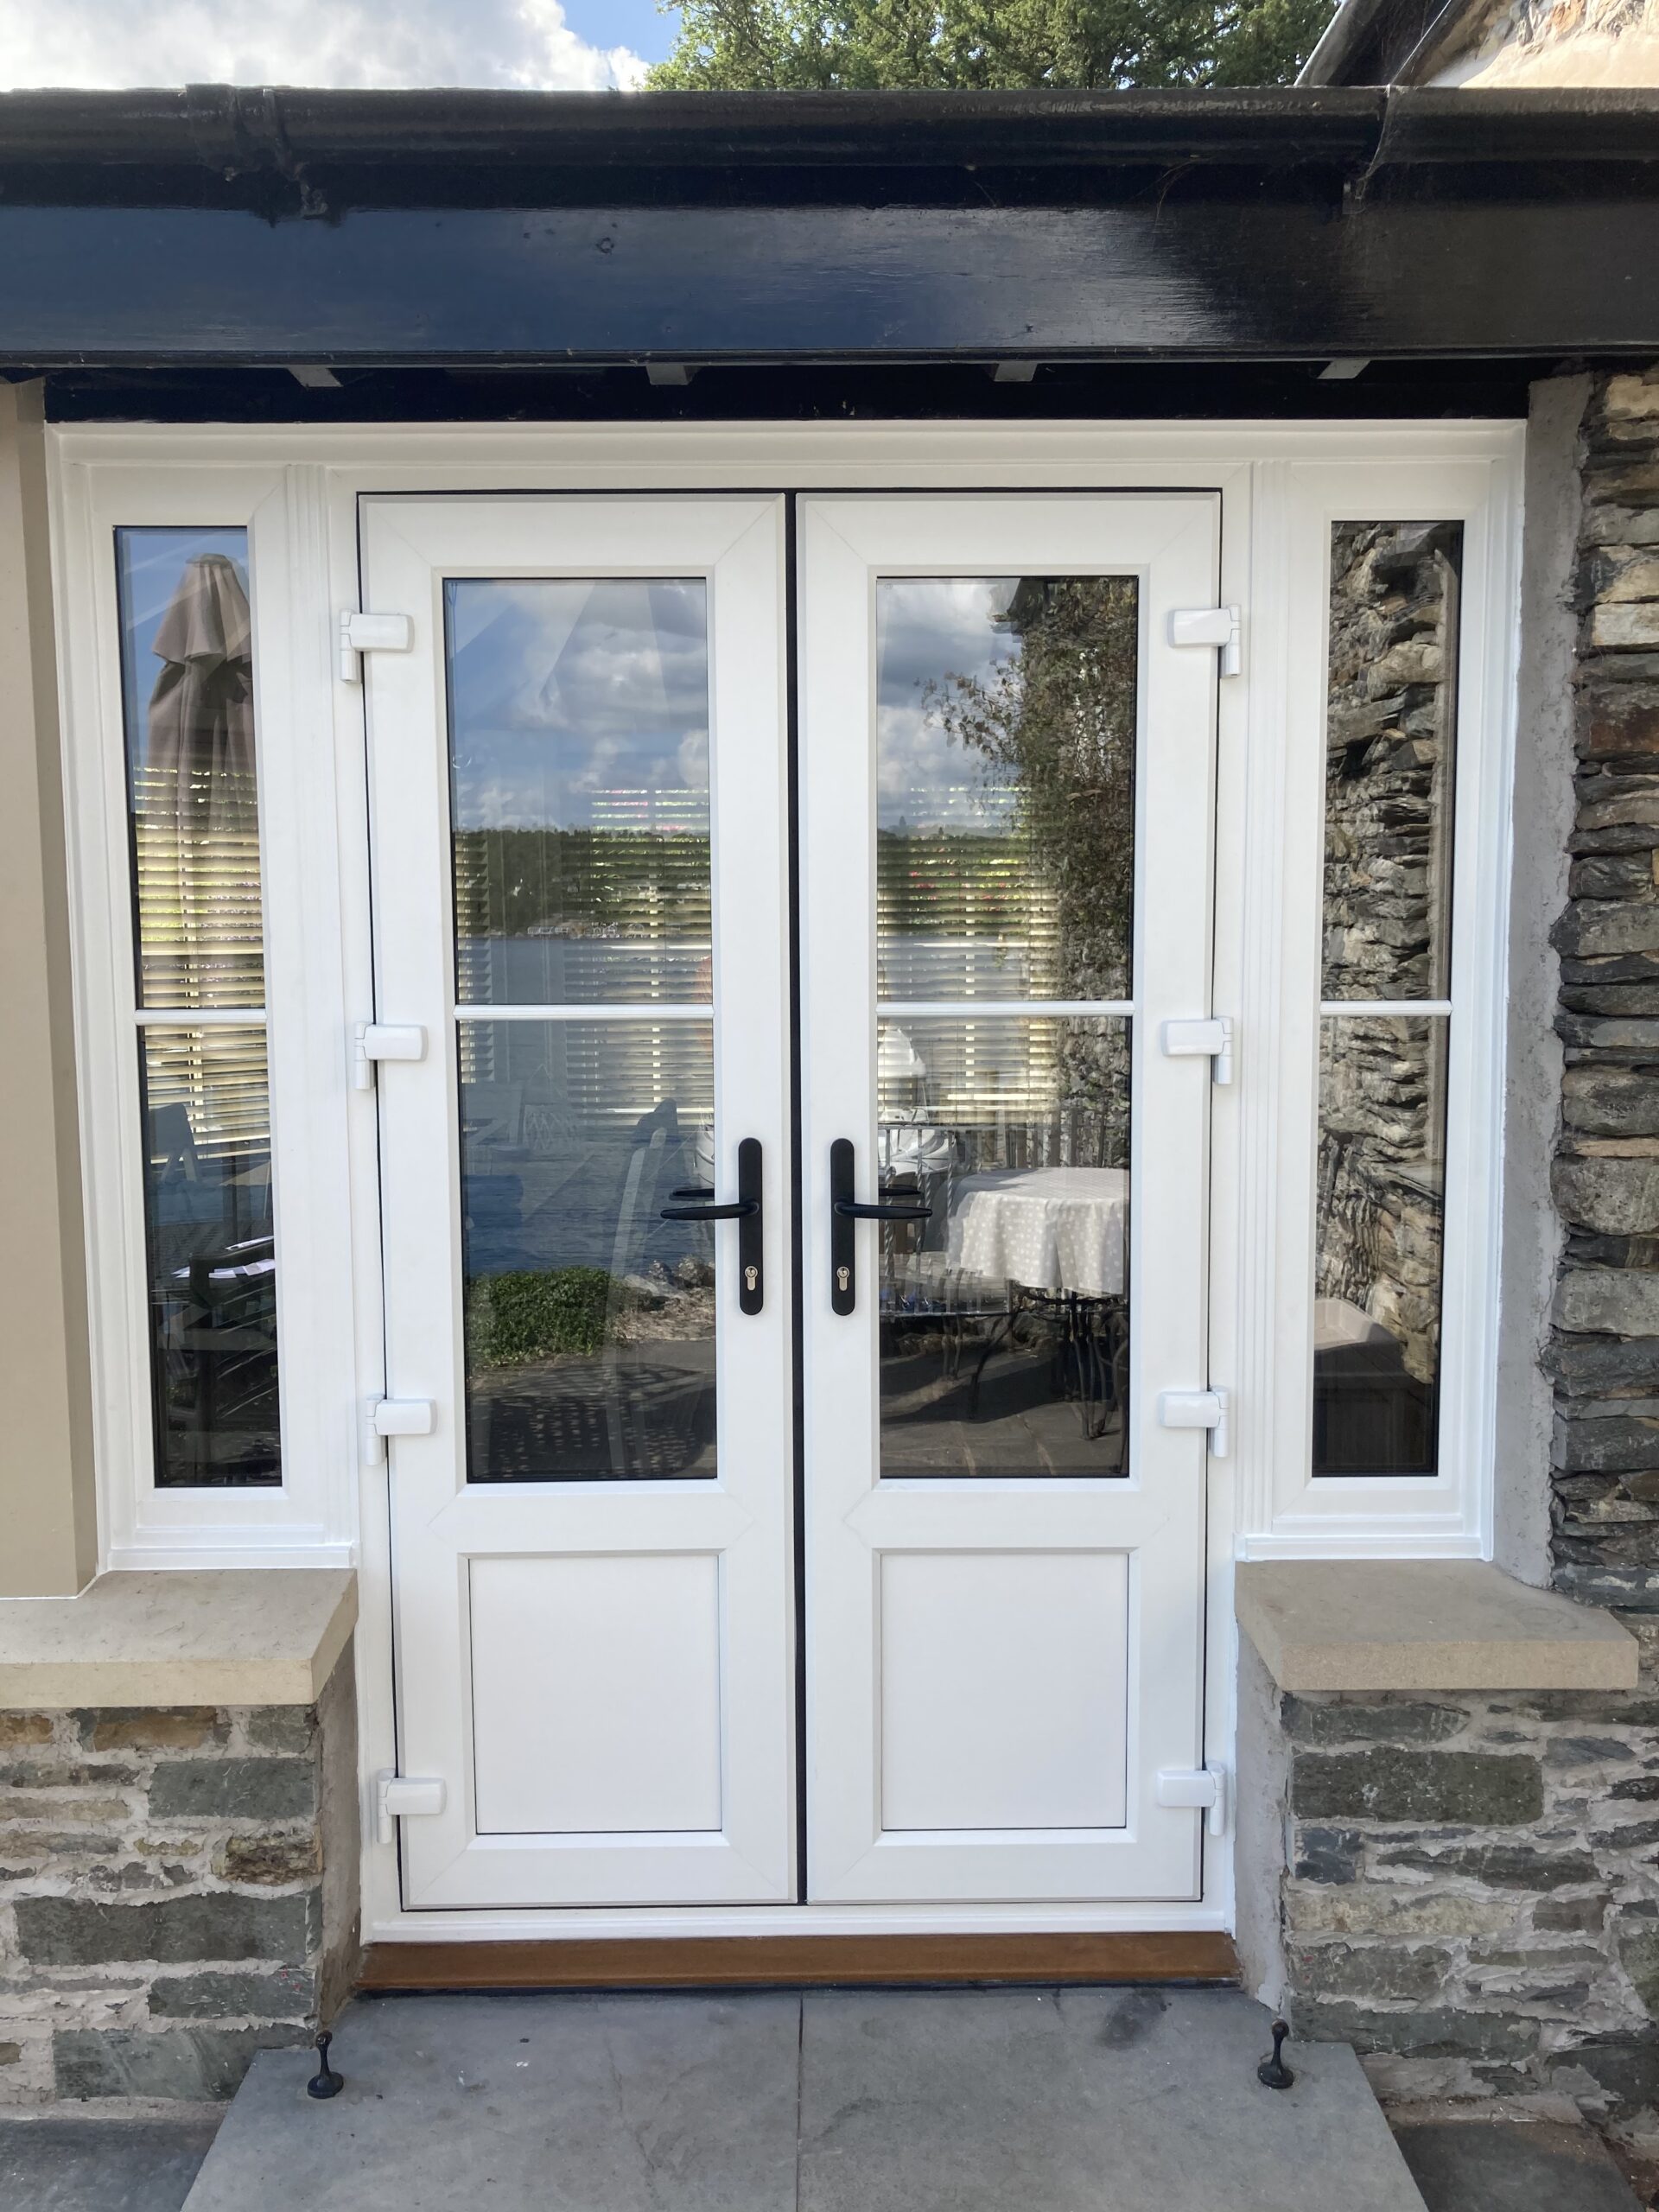 StormMeister flood doors double in white